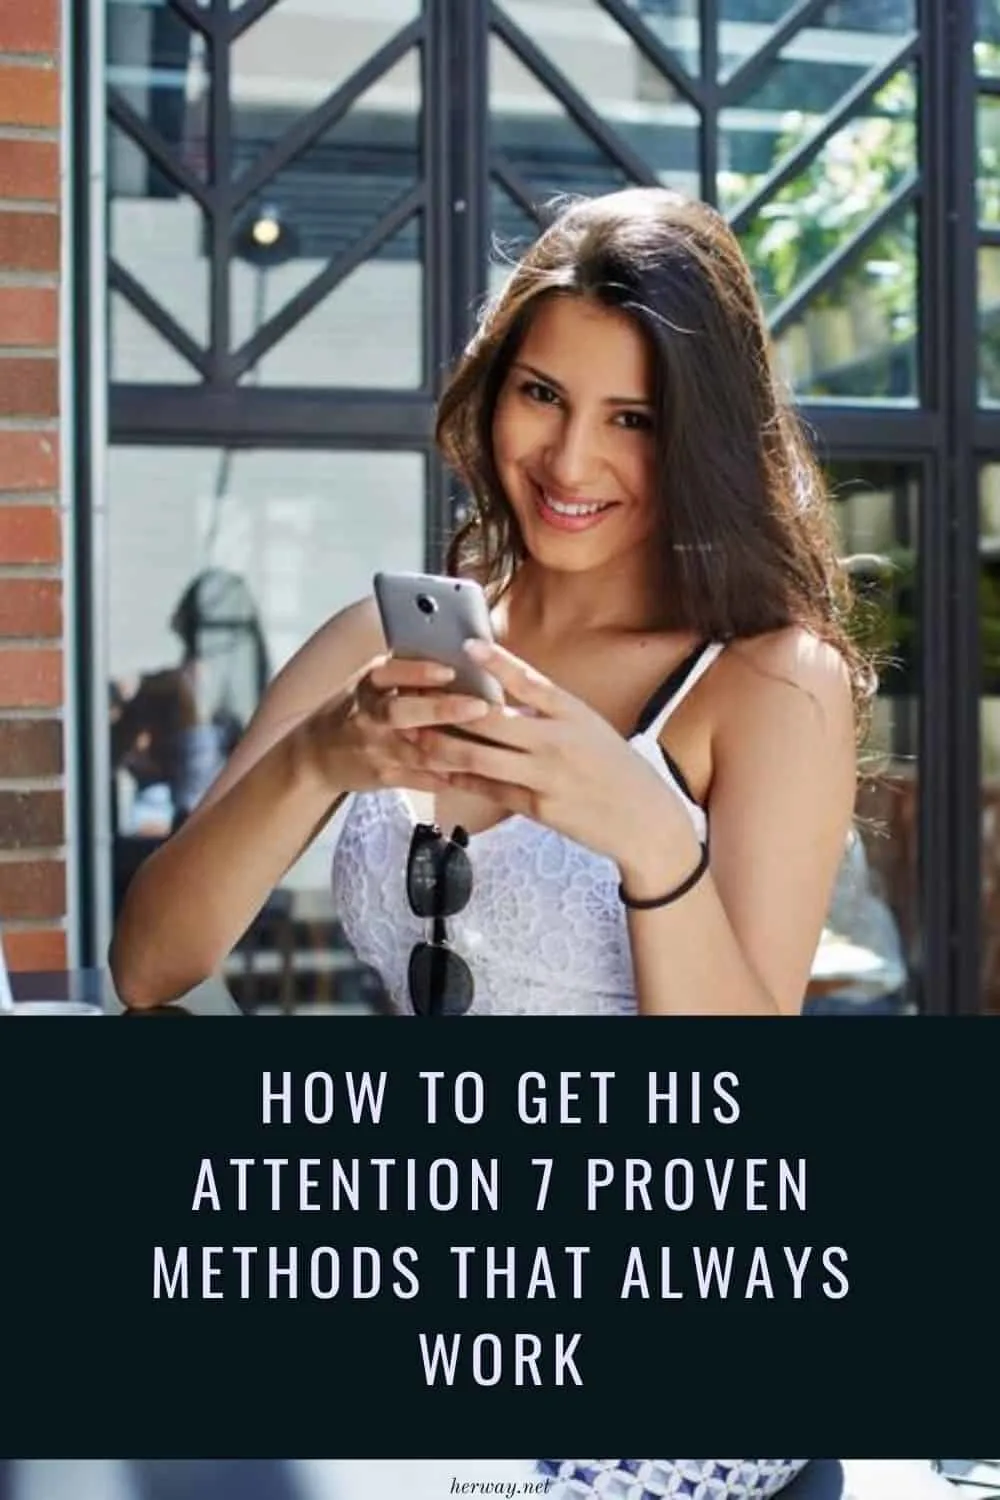 How To Get His Attention 7 Proven Methods That Always Work